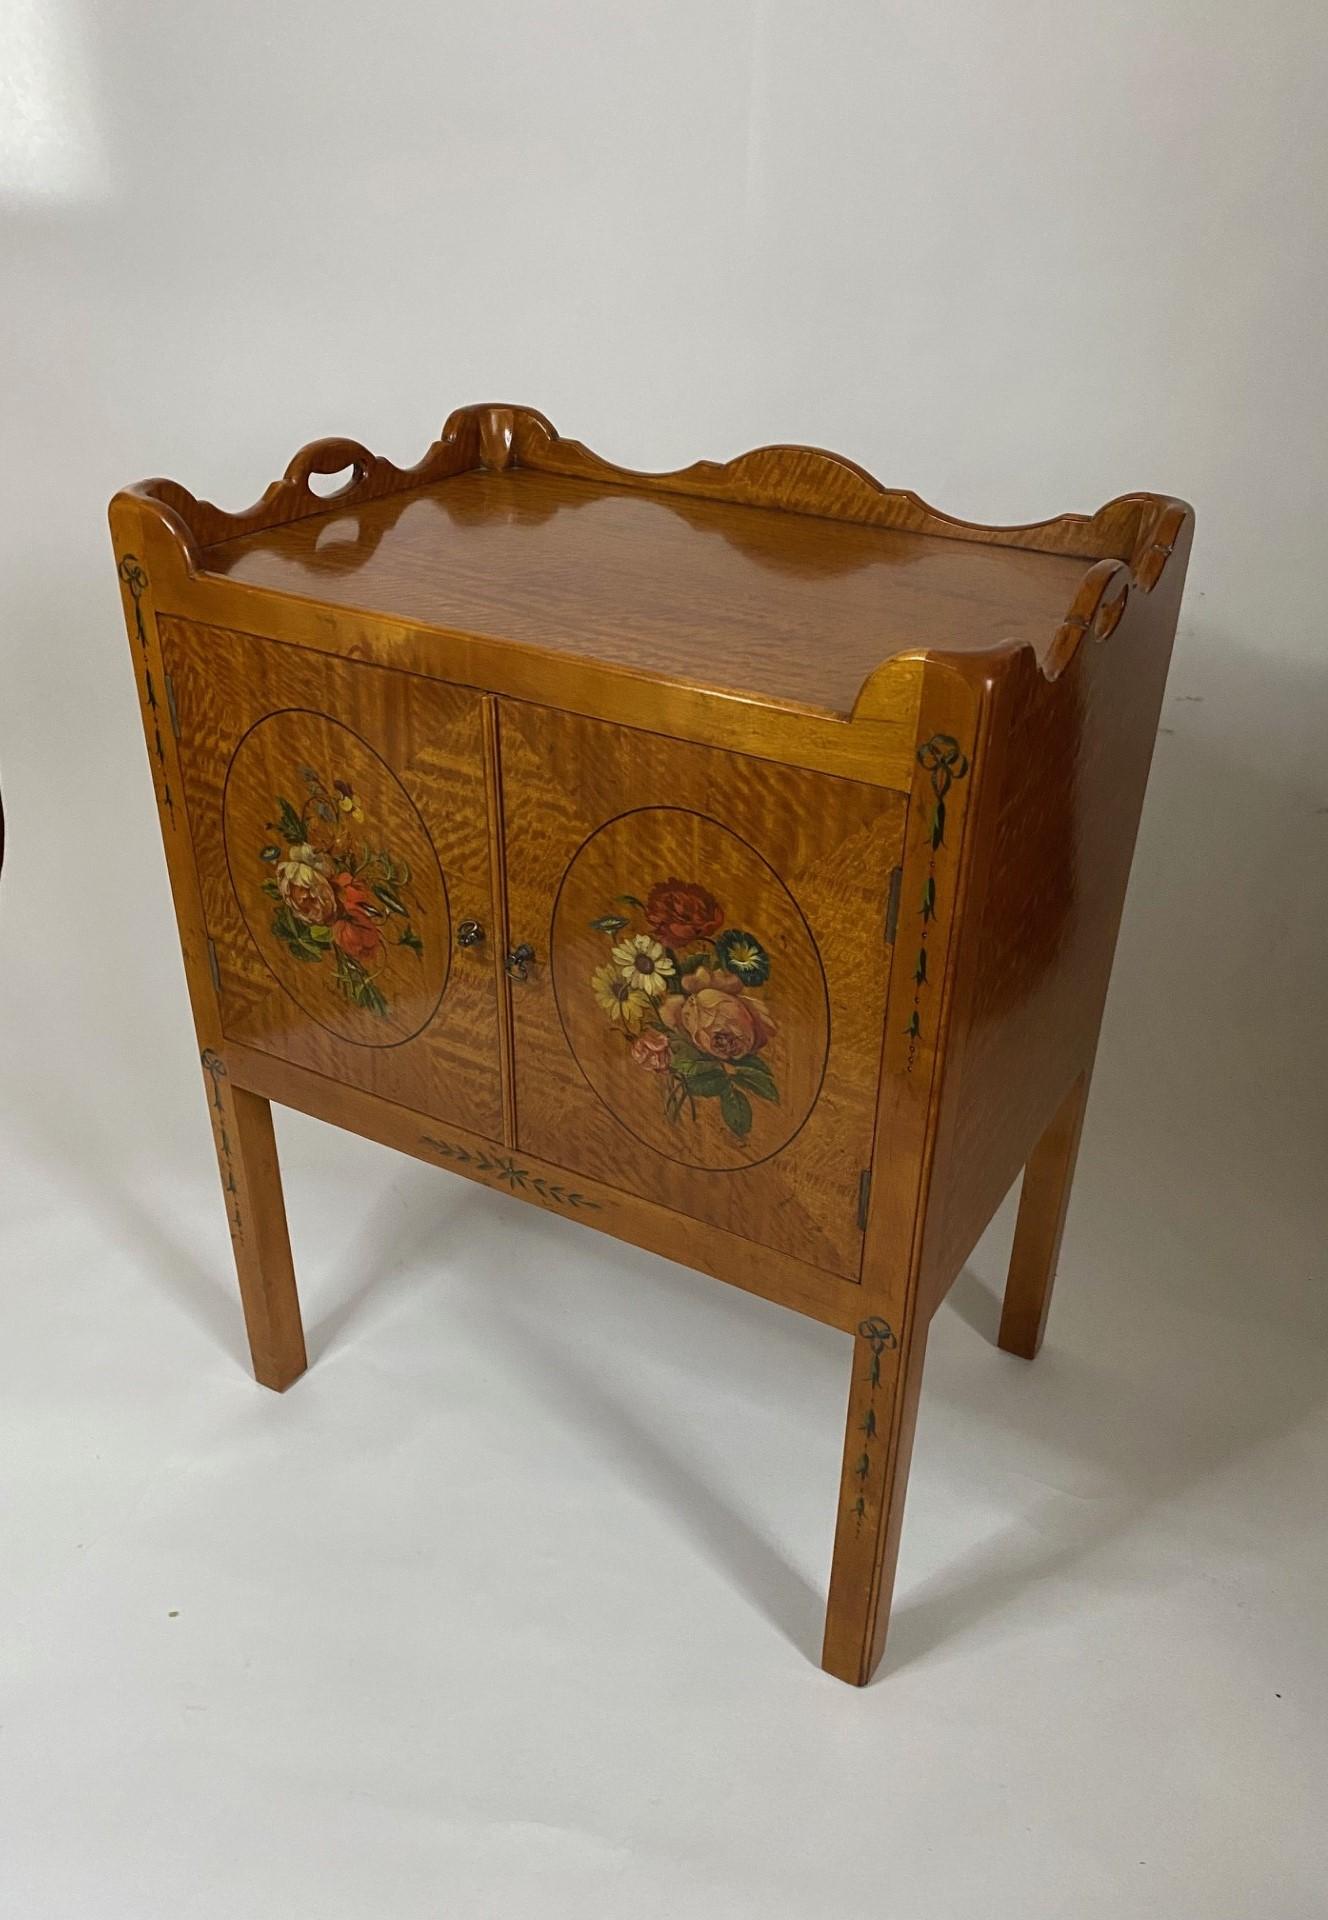 NEW Wood & Hogan  English-Made Satinwood Hand Decorated Two Door Pot Cupboard with Tray Top. Wonderful Detail to Hand Painted Floral Decoration.  A superb example of finely made furniture!  